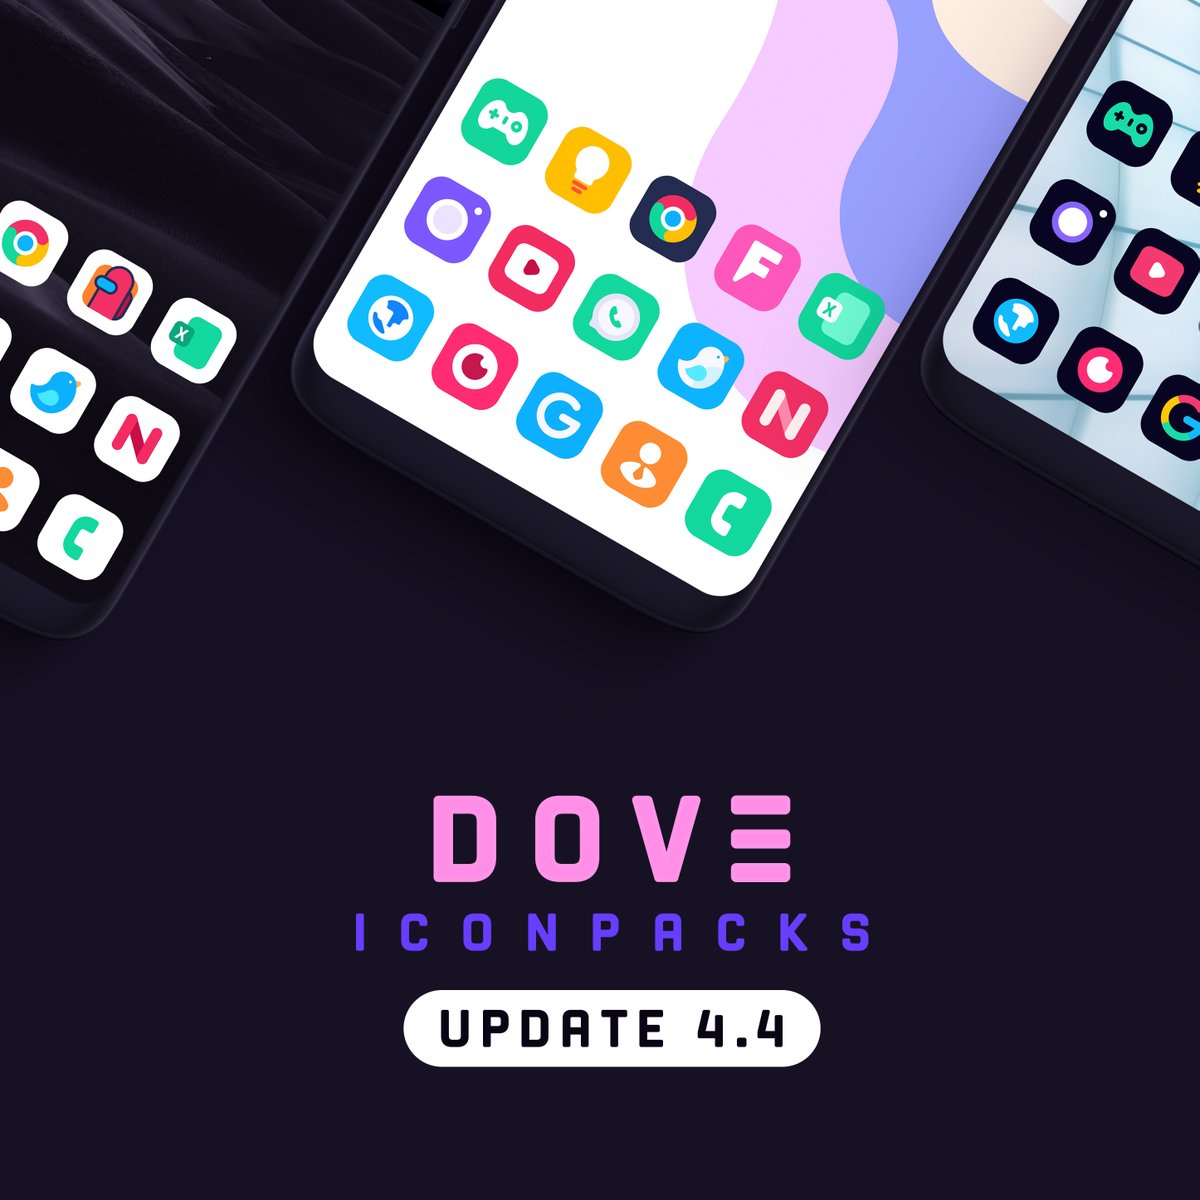 Dove IconPack Update 4.4 • 60+ New Icons (Total 3700+) • New and Updated Activities. Dove : bit.ly/doveicons Dove Dark : bit.ly/dovedark Dove Light : bit.ly/DoveLight 🎁 5 Promo Codes Giveaway : ❤️ , Retweet & Comment to Participate